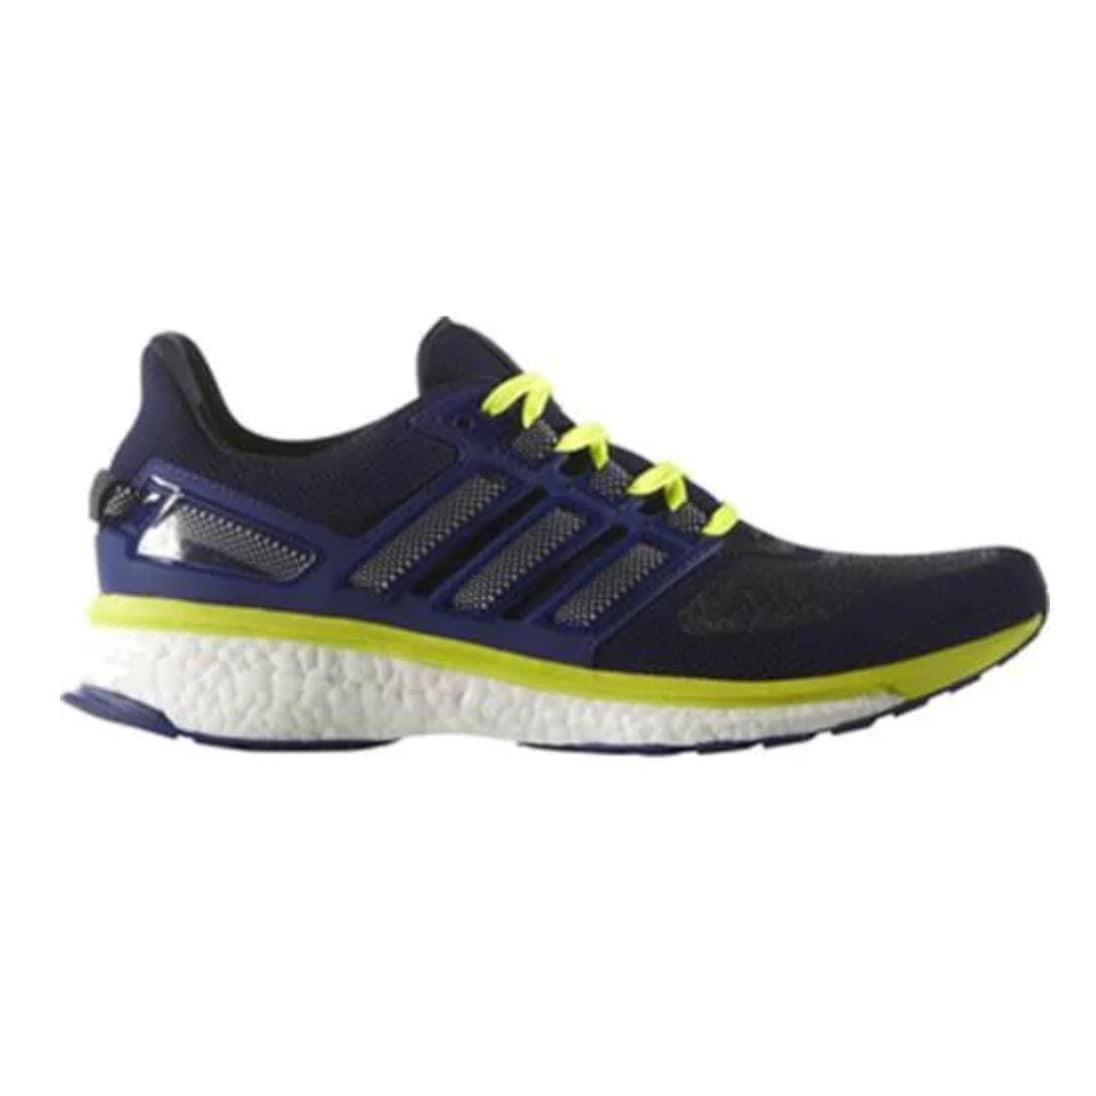 Shop Men's adidas Energy Boost 3 Running Shoe Unity Ink/White/Solar Yellow  - Overstock - 13242662